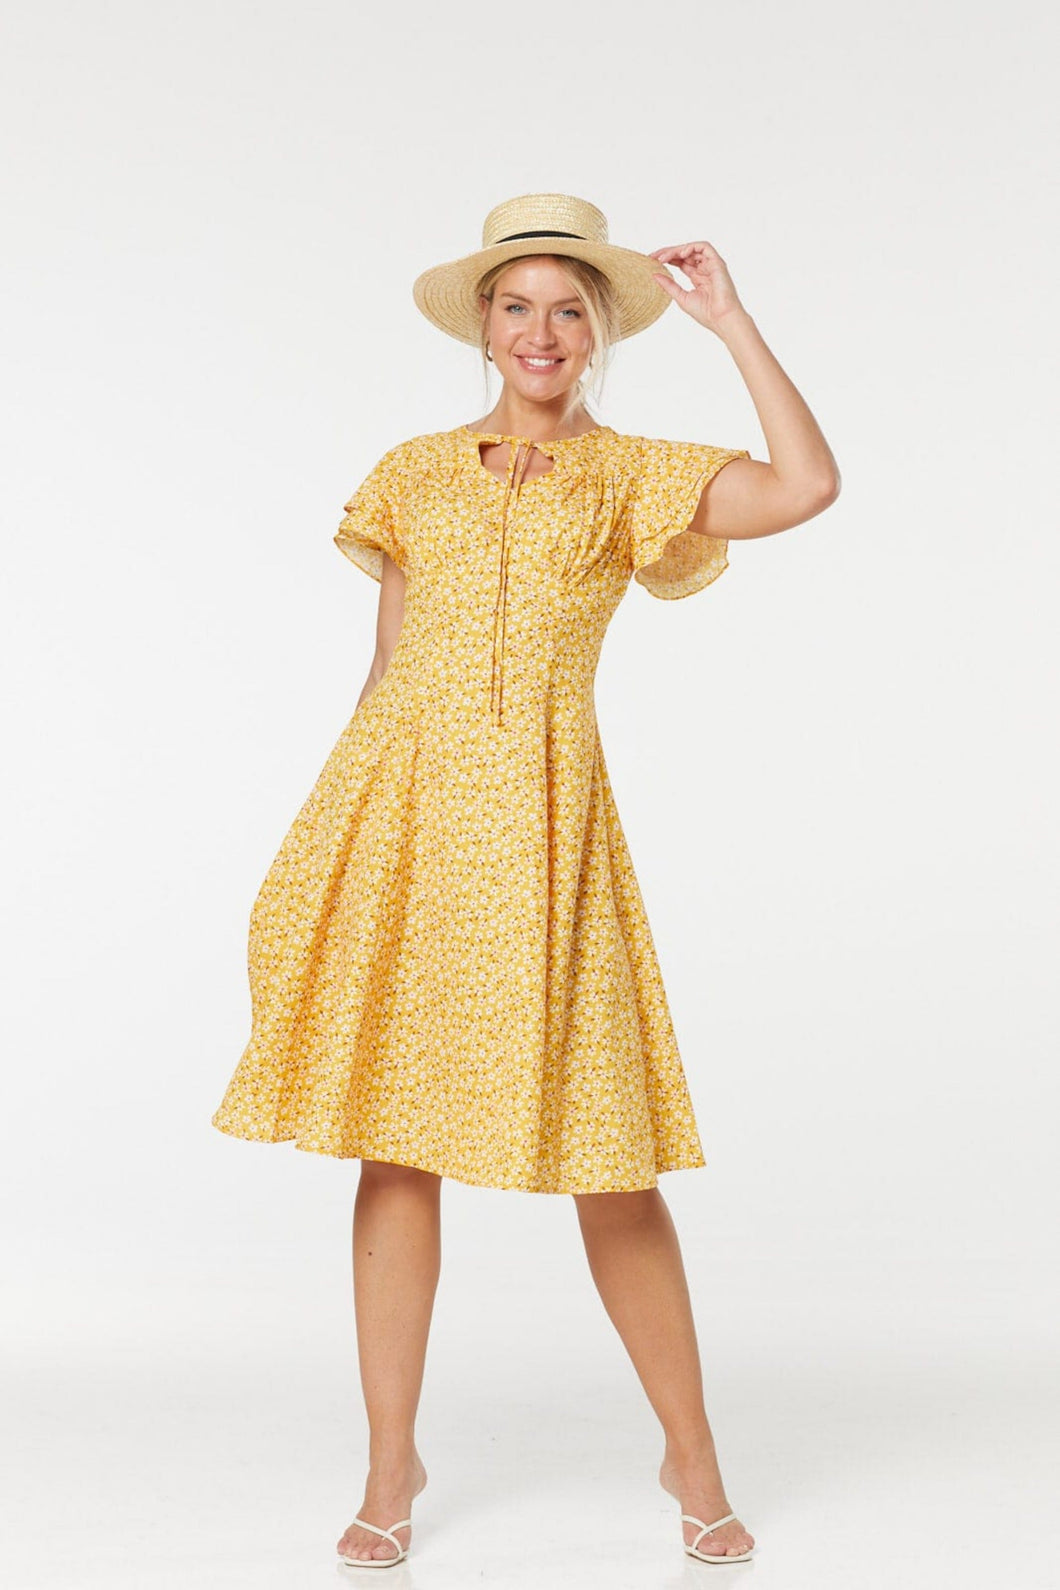 TIMELESS- 40's STYLE YELLOW FLORAL